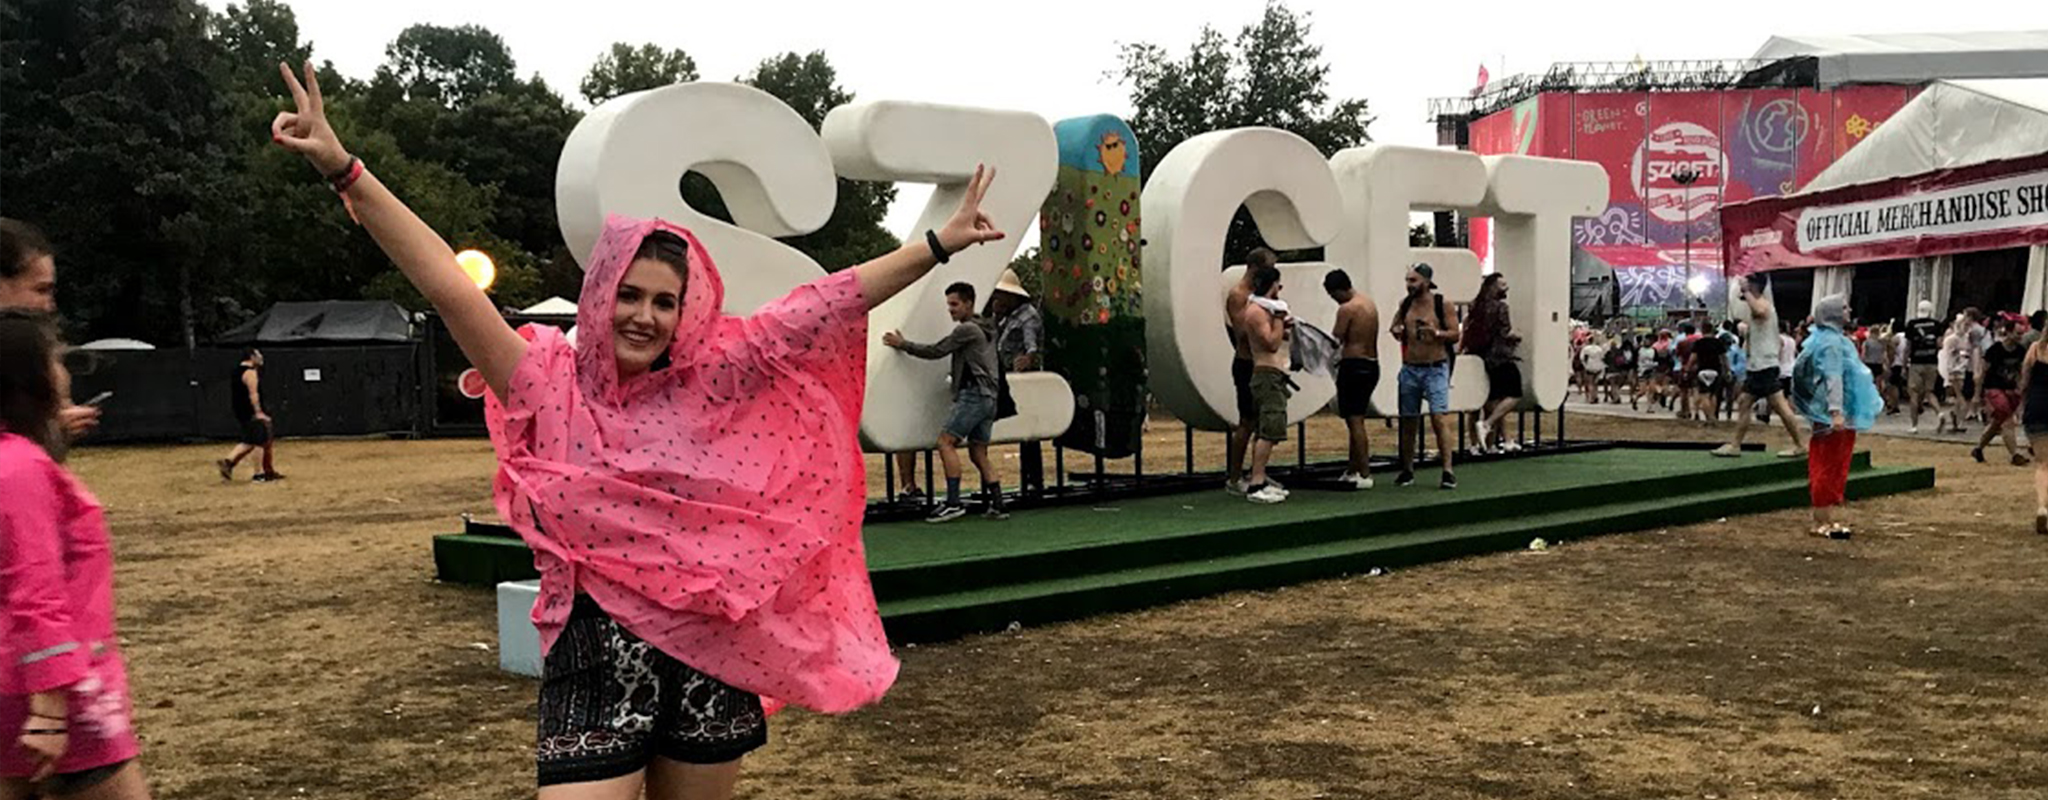 Everything you need to know about Sziget